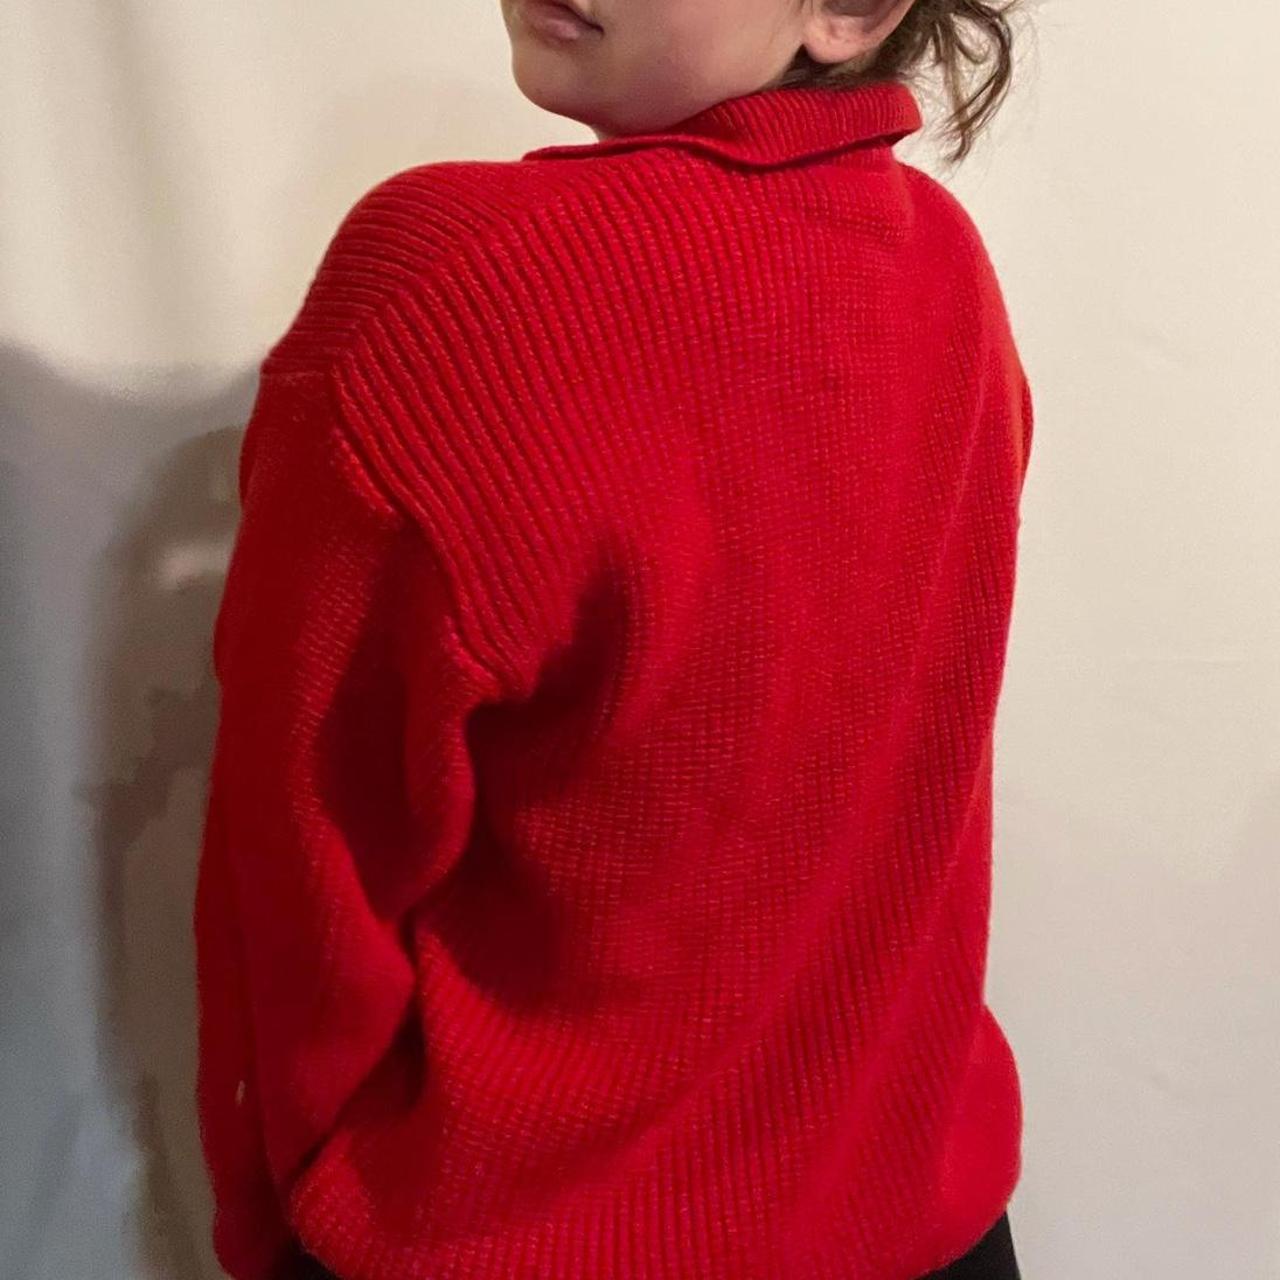 Product Image 3 - RED THICK SWEATER!! Can be